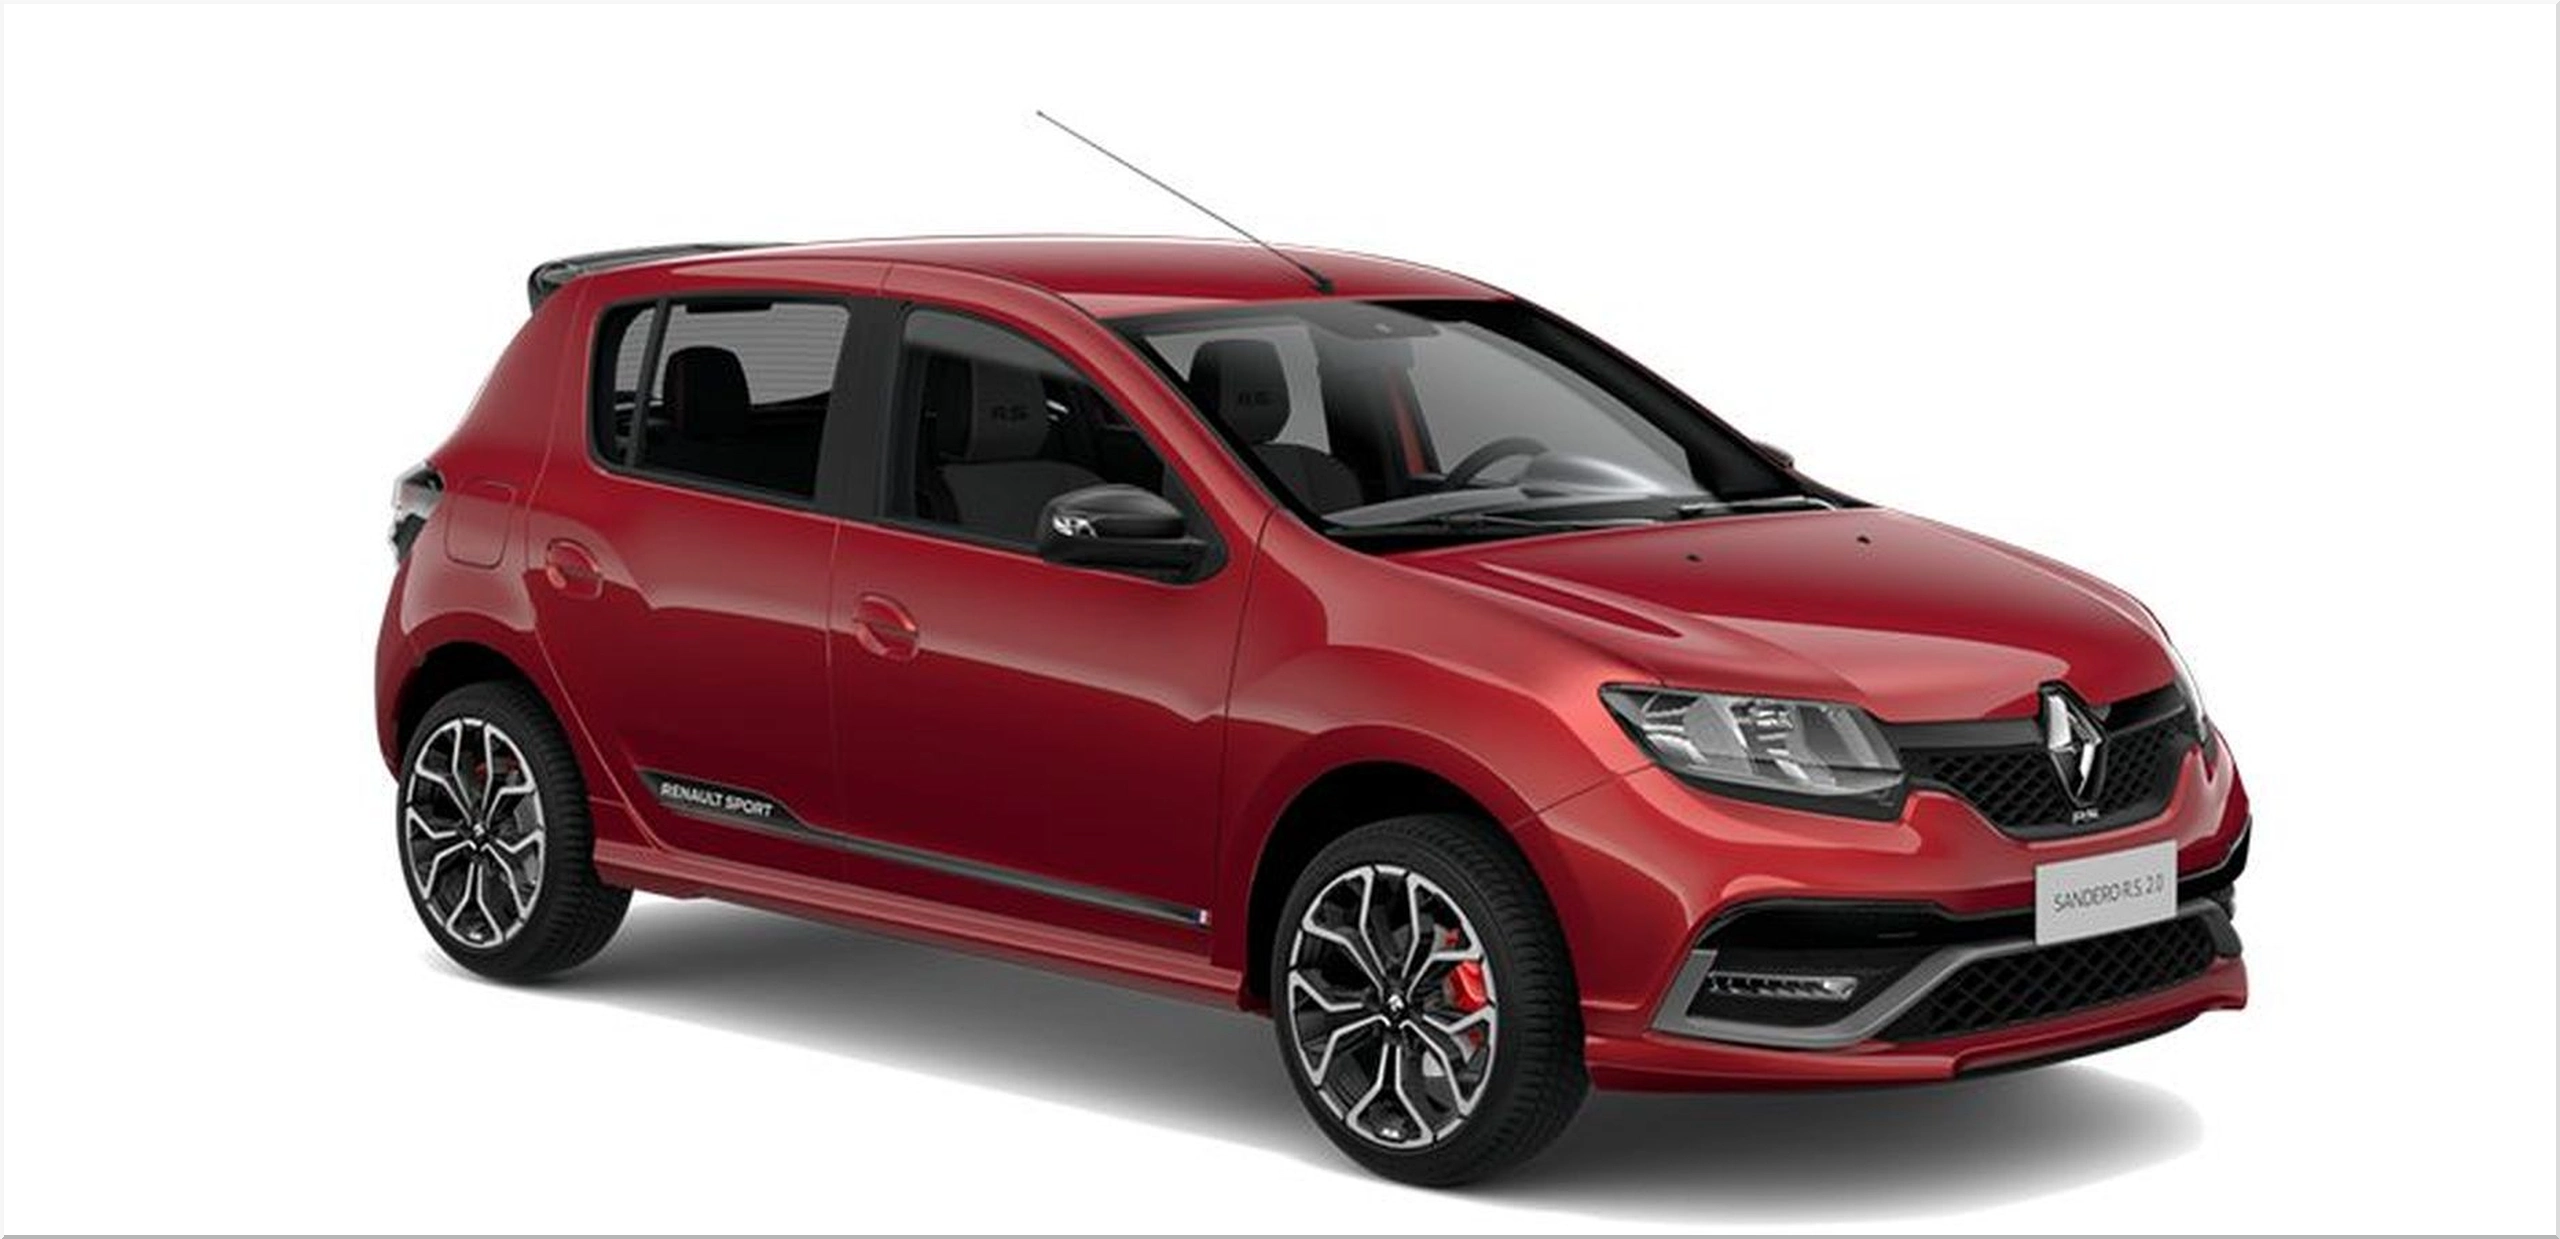 There's a new Dacia Sandero RS, and it's still not for us